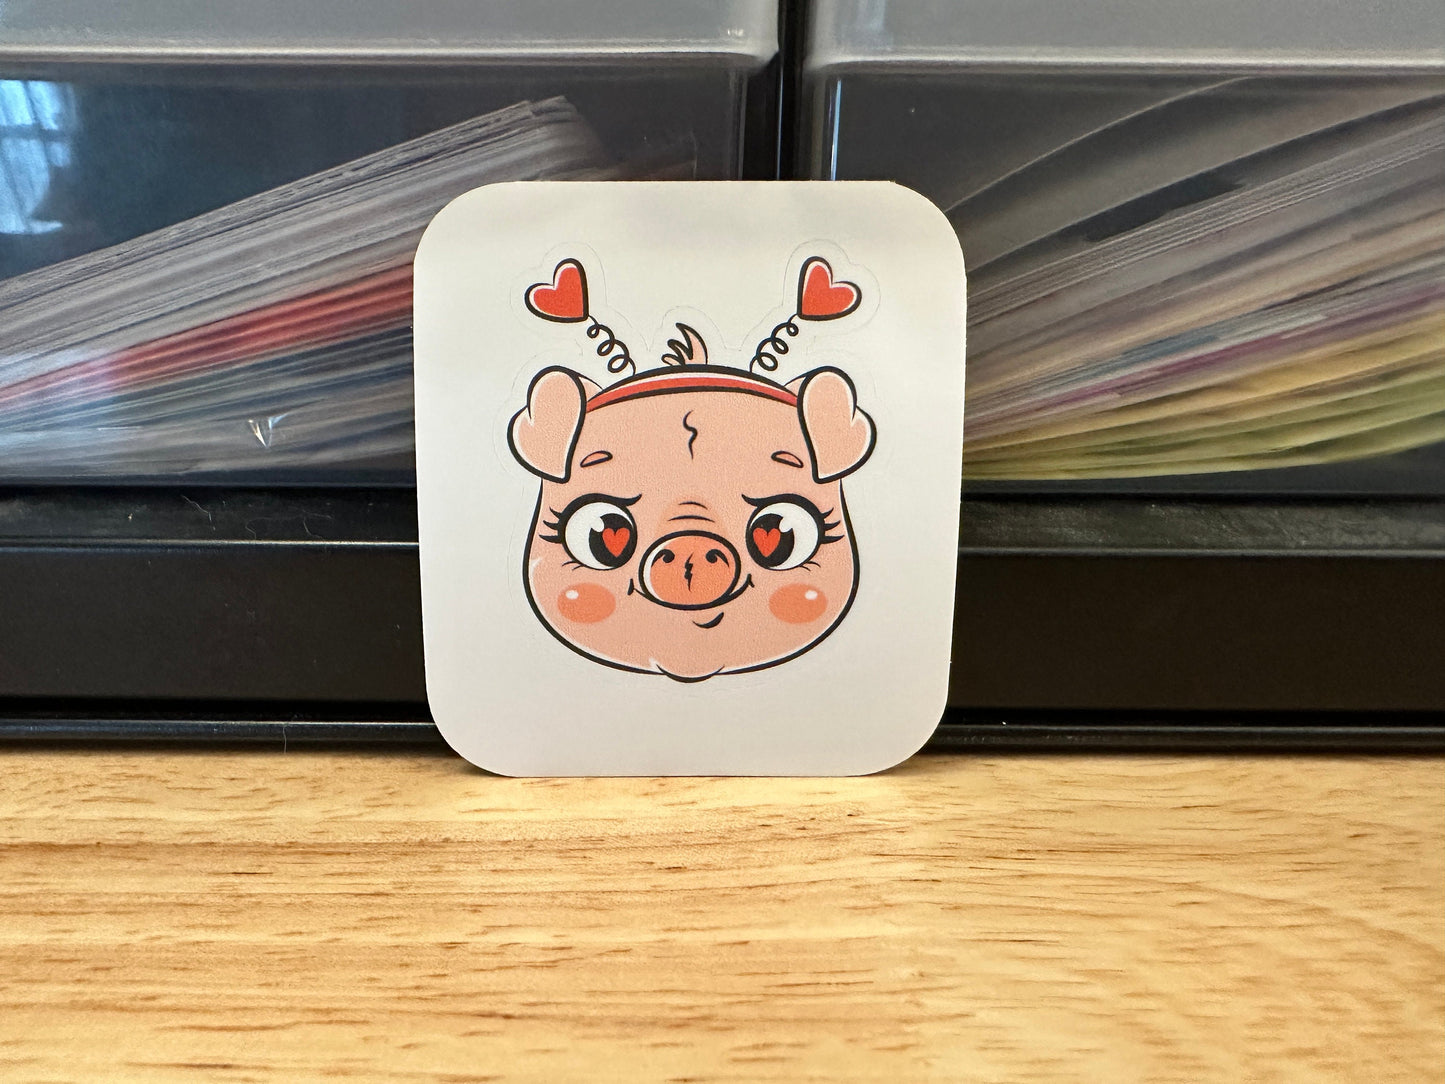 Cute Pig with hearts STICKER, Cute Pig with paws sticker, Laptop sticker, Halographic option, Pig with headband